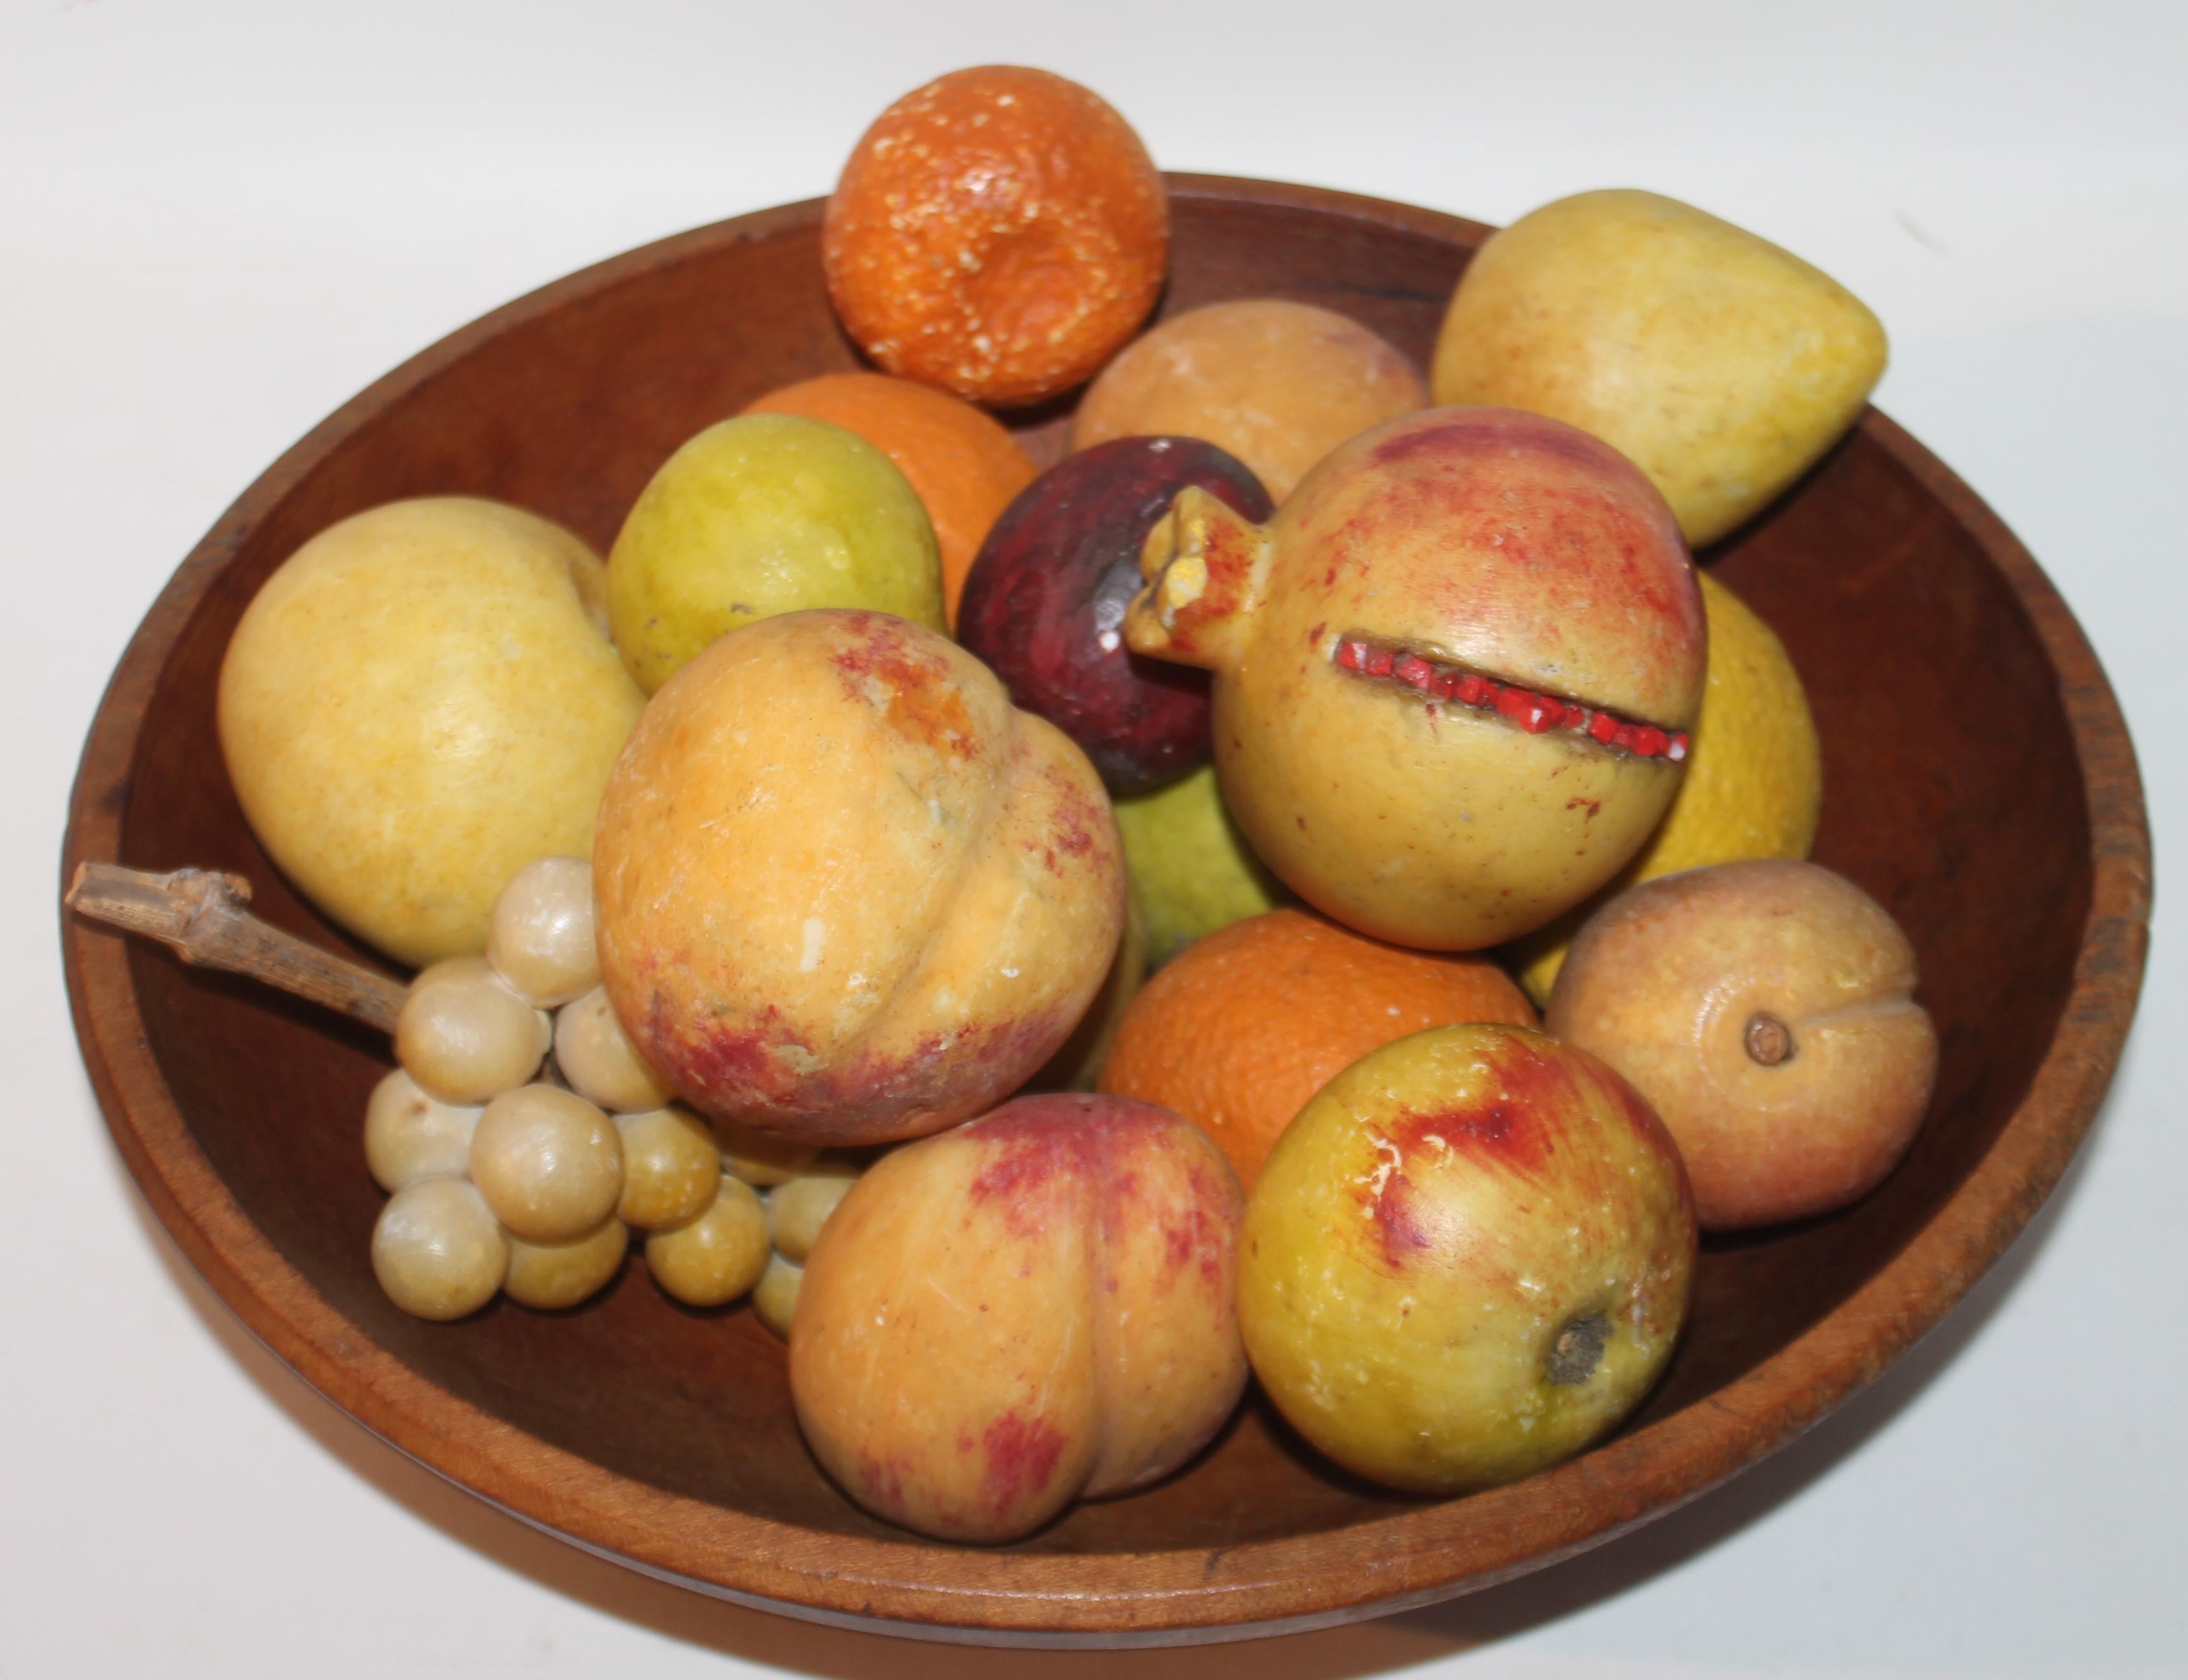 19th C butter bowl and eighteen piece collection of stone fruit. 
Beautiful decorative collection on a table.